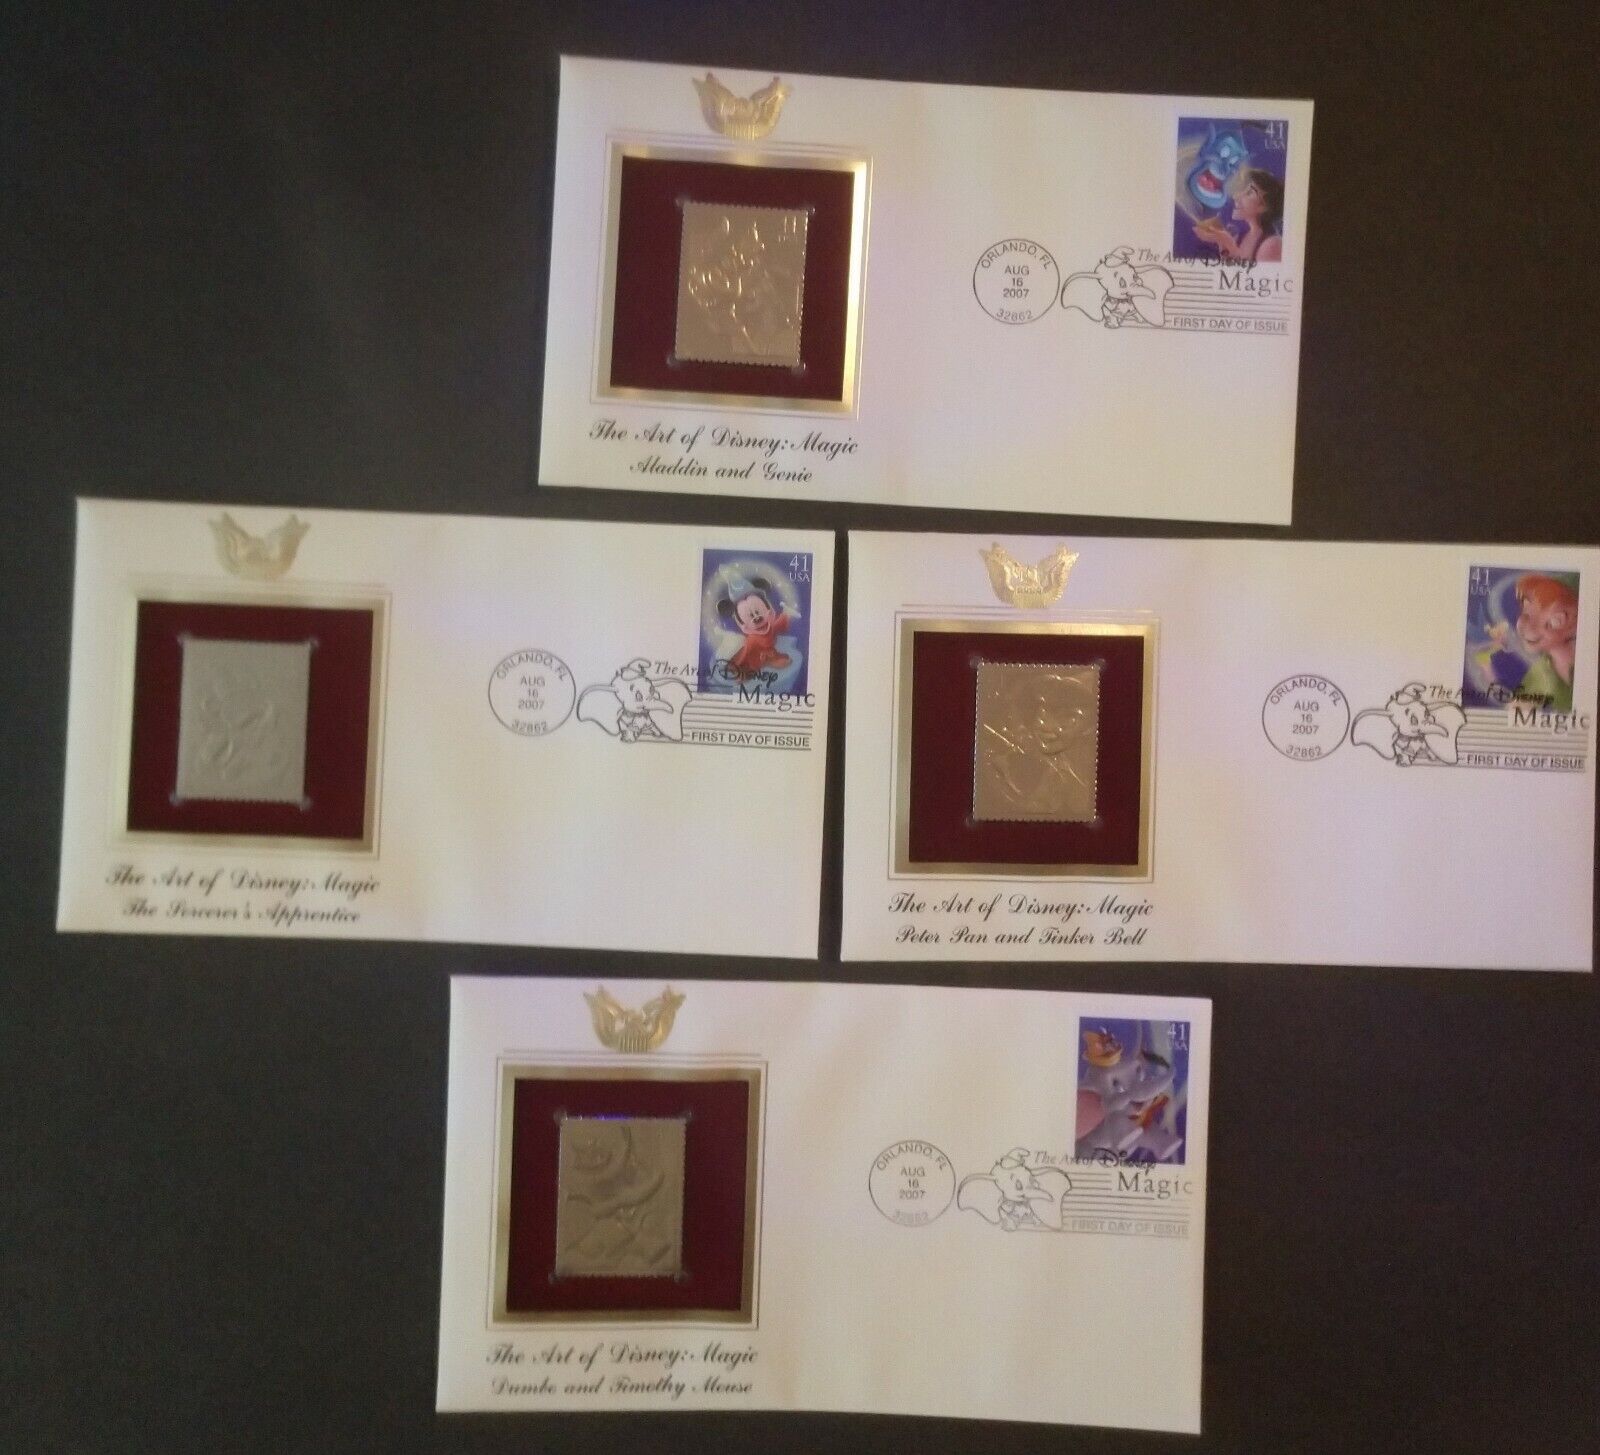 1st Day Issue ART OF DISNEY: MAGIC Full Set of 4 USPS Stamps w/ Gold Foil 